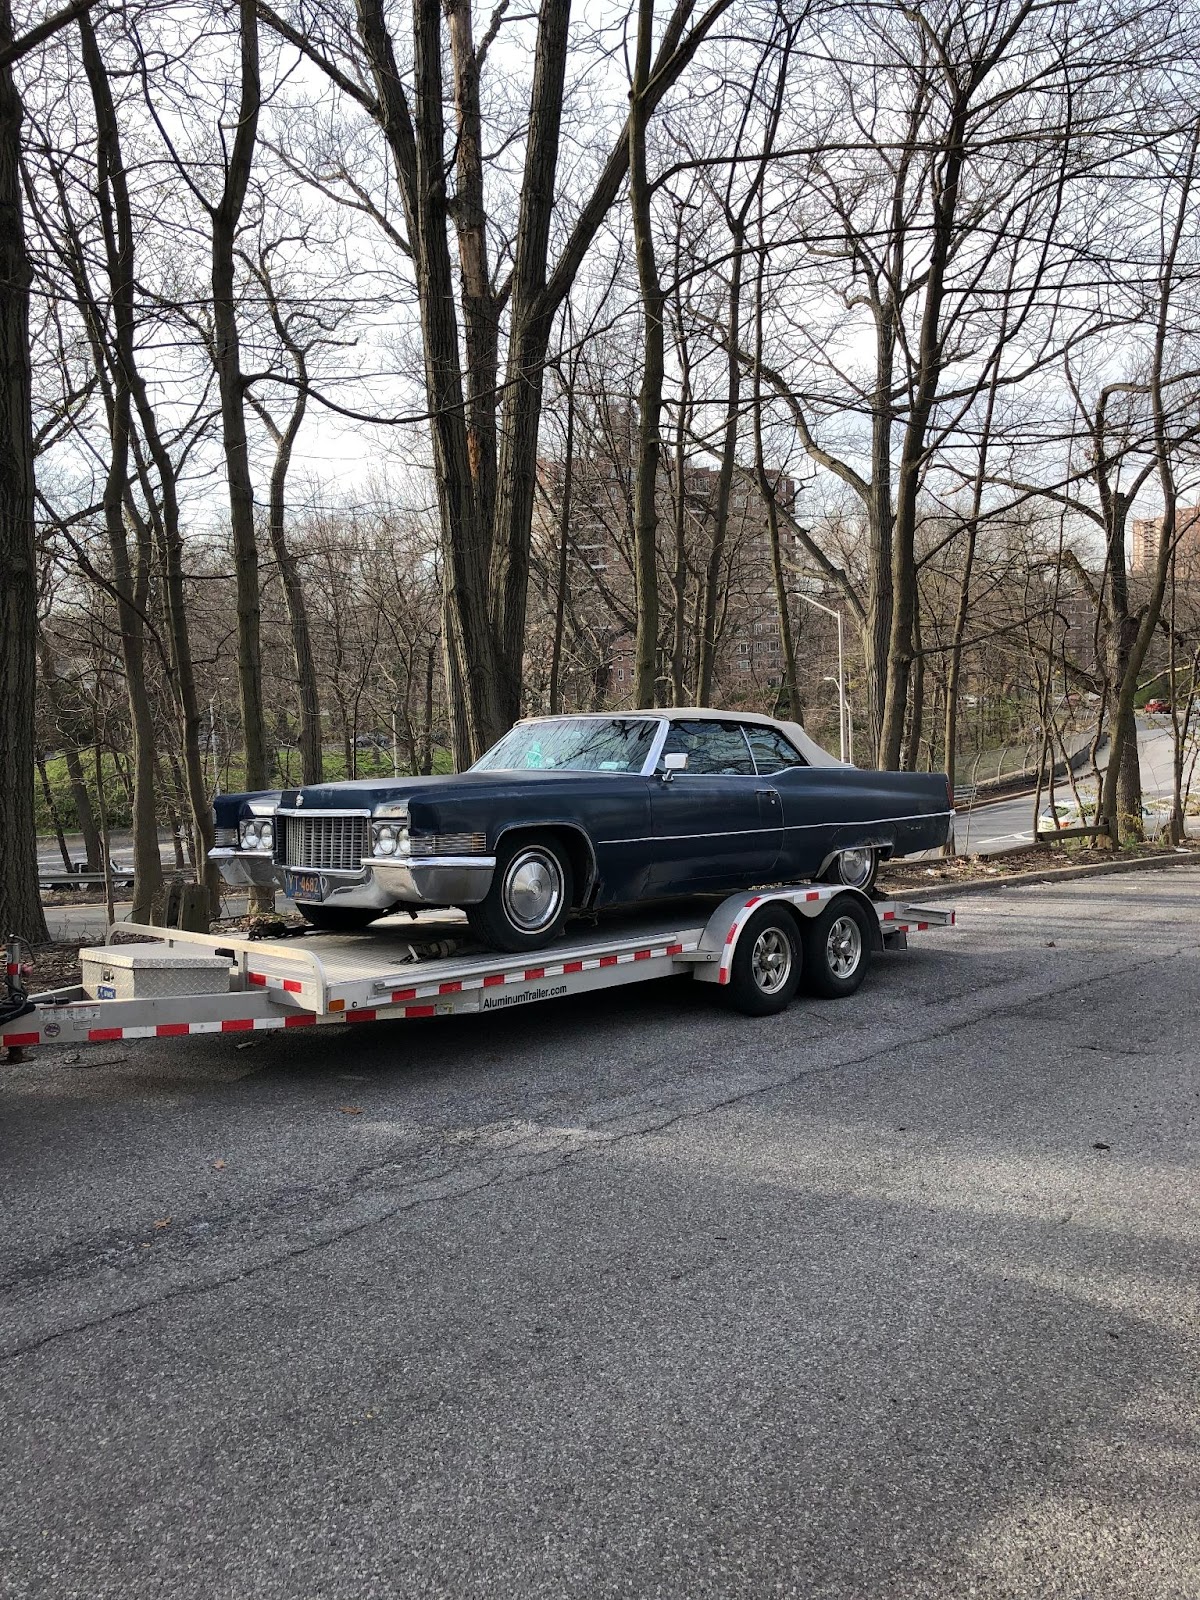 A car being pulled on a trailer bed.